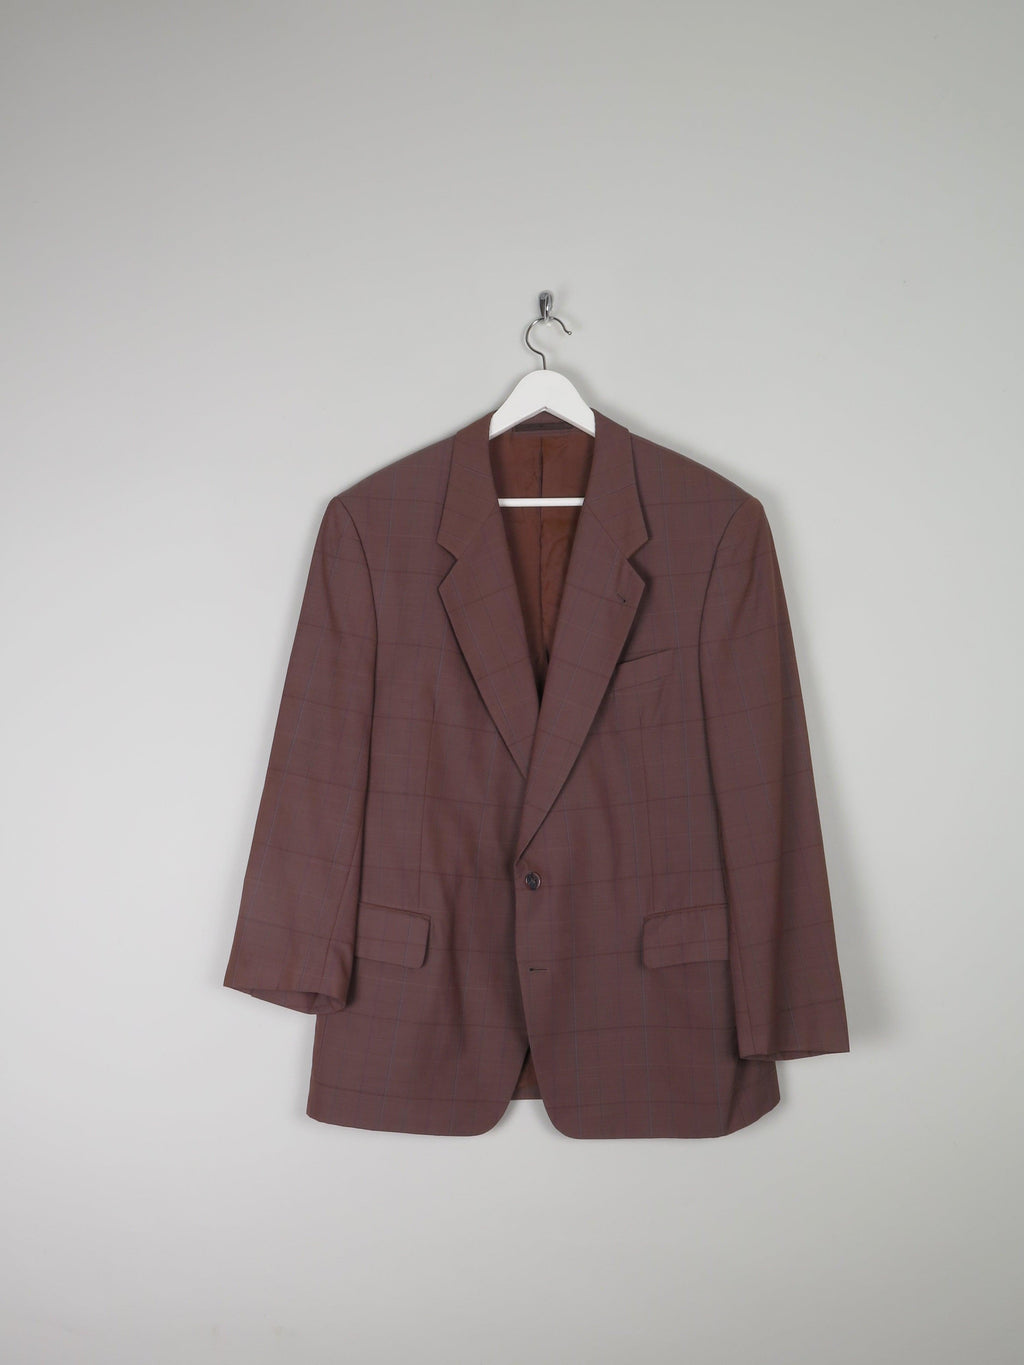 Mens Tan Brown Check Tailored Jacket 42/44 Chest sleeves 24 (s) - The Harlequin